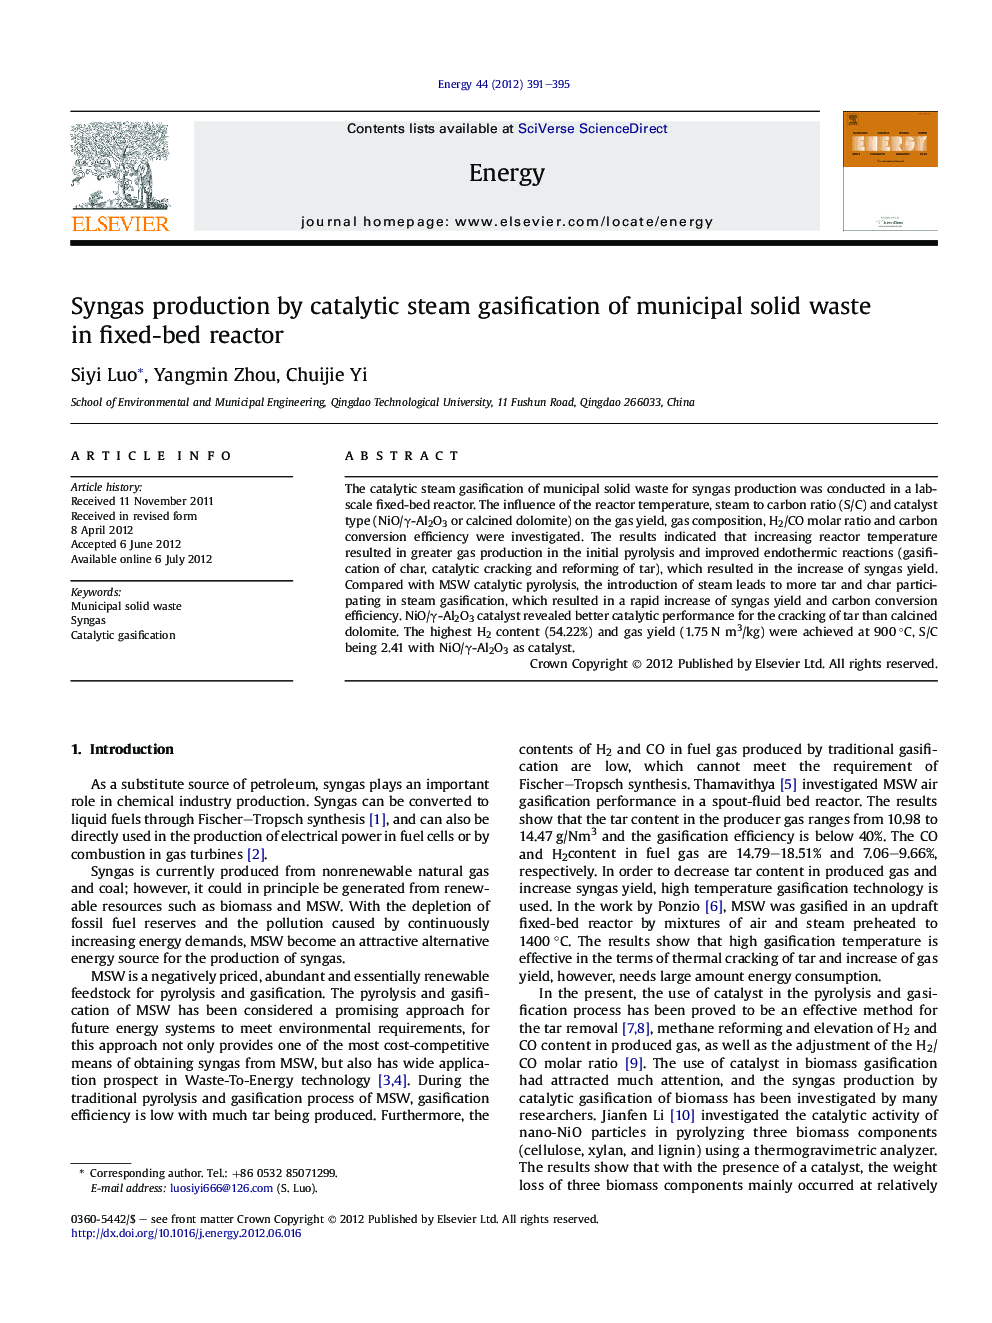 Syngas production by catalytic steam gasification of municipal solid waste in fixed-bed reactor